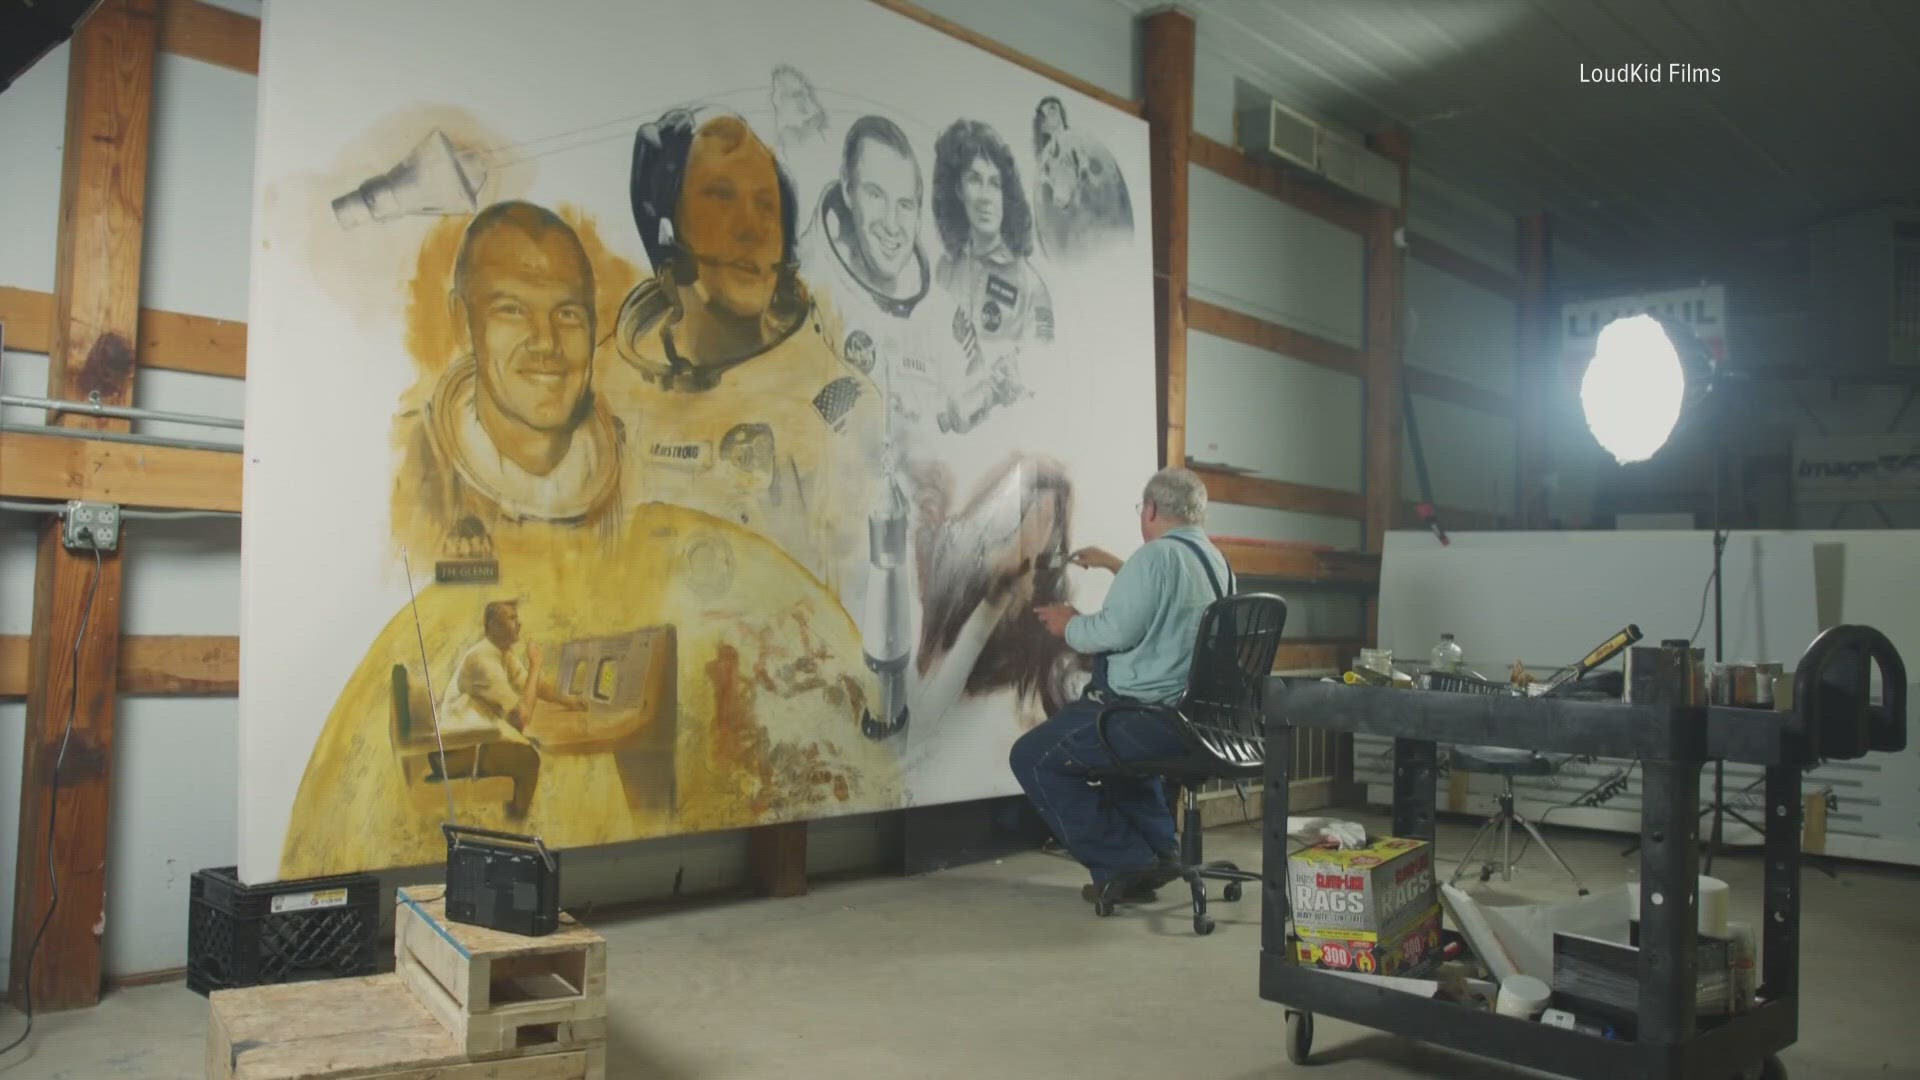 The 9-by-12 painting called "Ohioans In Space" features John Glenn, Neil Armstrong, Jim Lovell, and Judith Resnik.